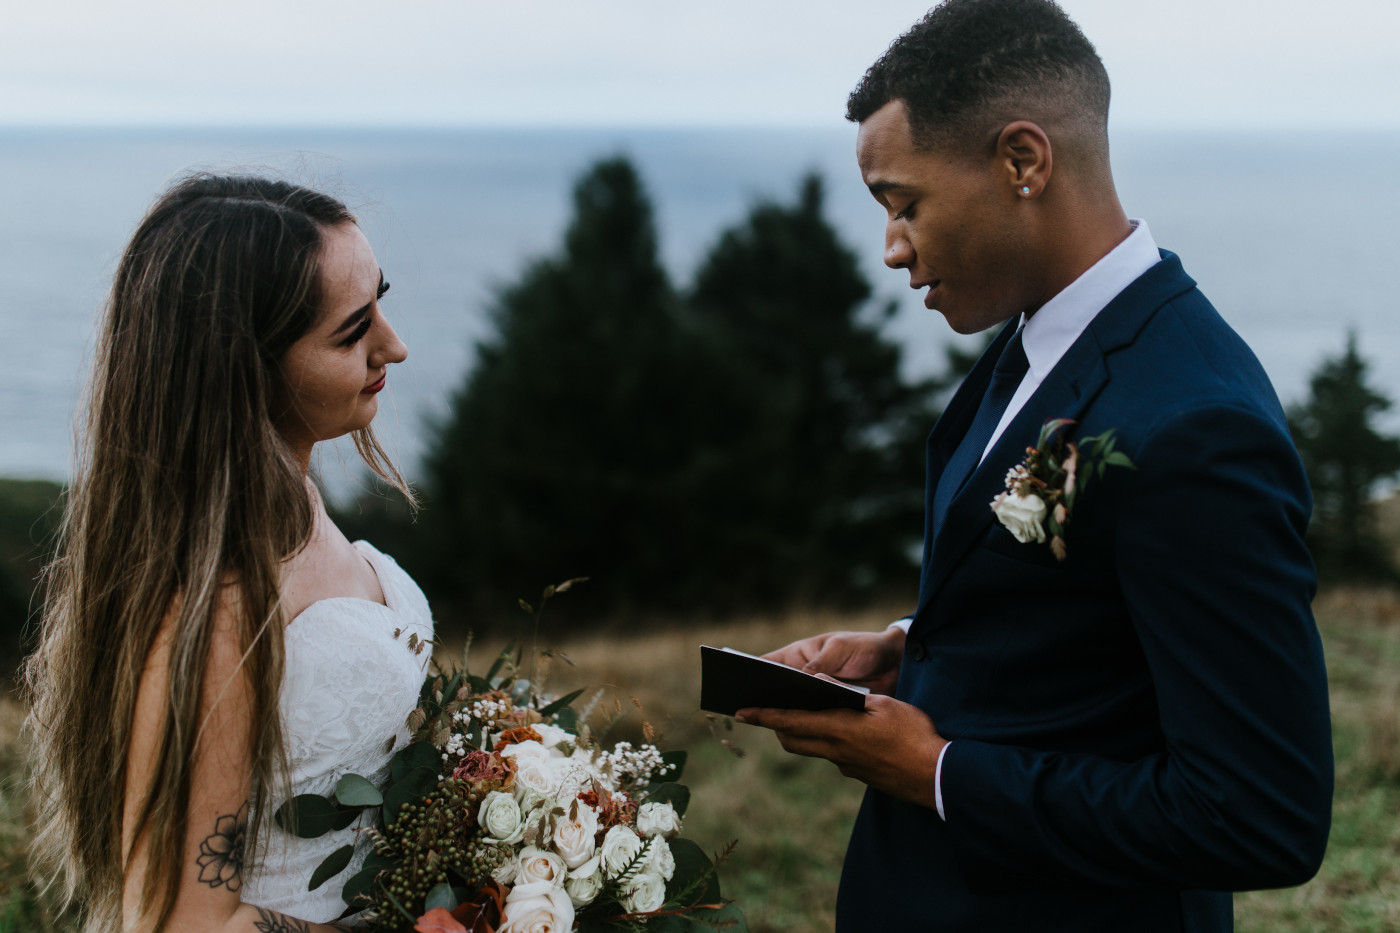 Deandre reads his vows. Elopement photography at Mount Hood by Sienna Plus Josh.